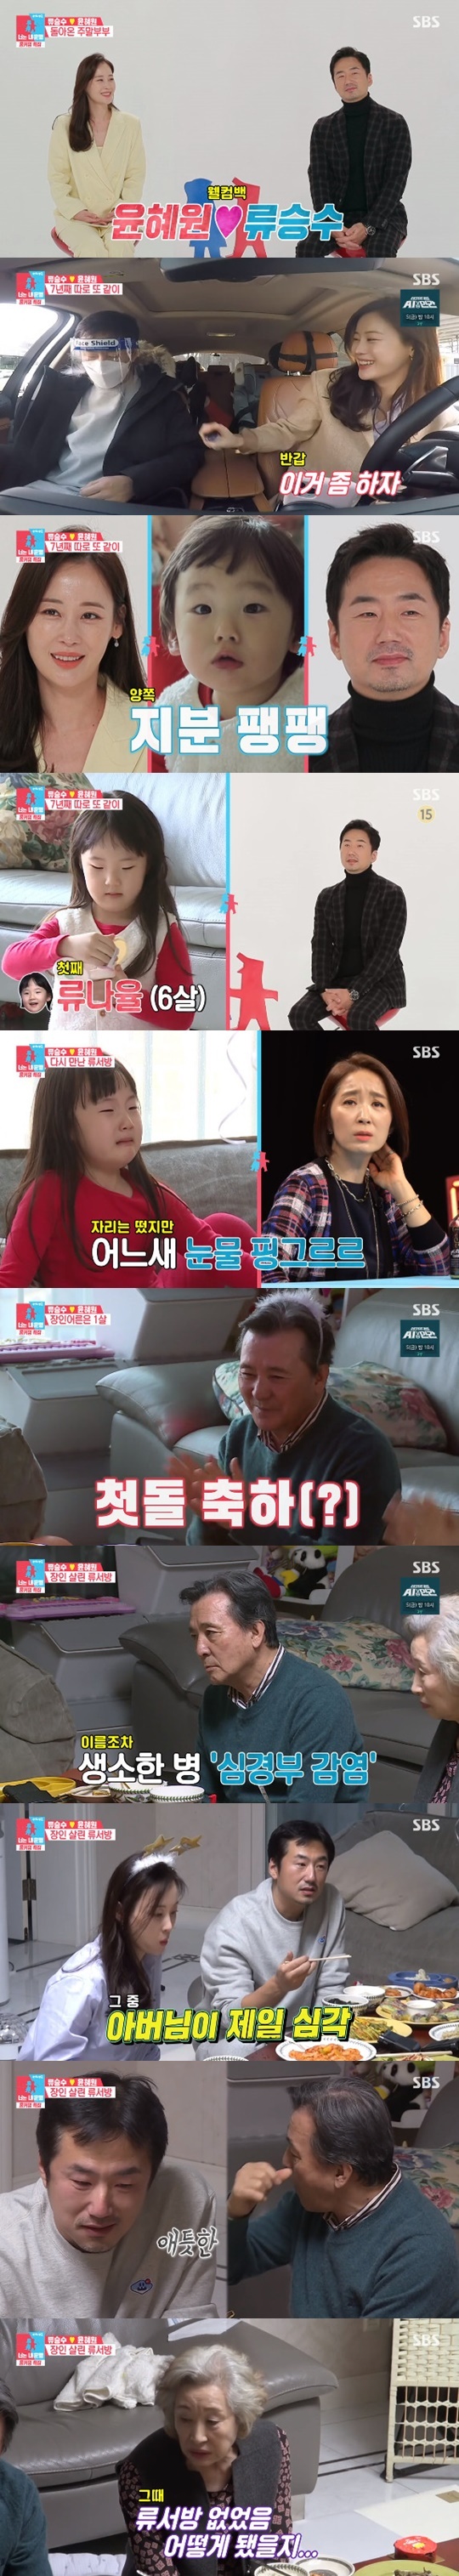 ‘Bronze Dream 2’Ryu Seung-soo ♥ Yoon Hye-won reveals second son who looks like the same…  Returning weekend couple (general)